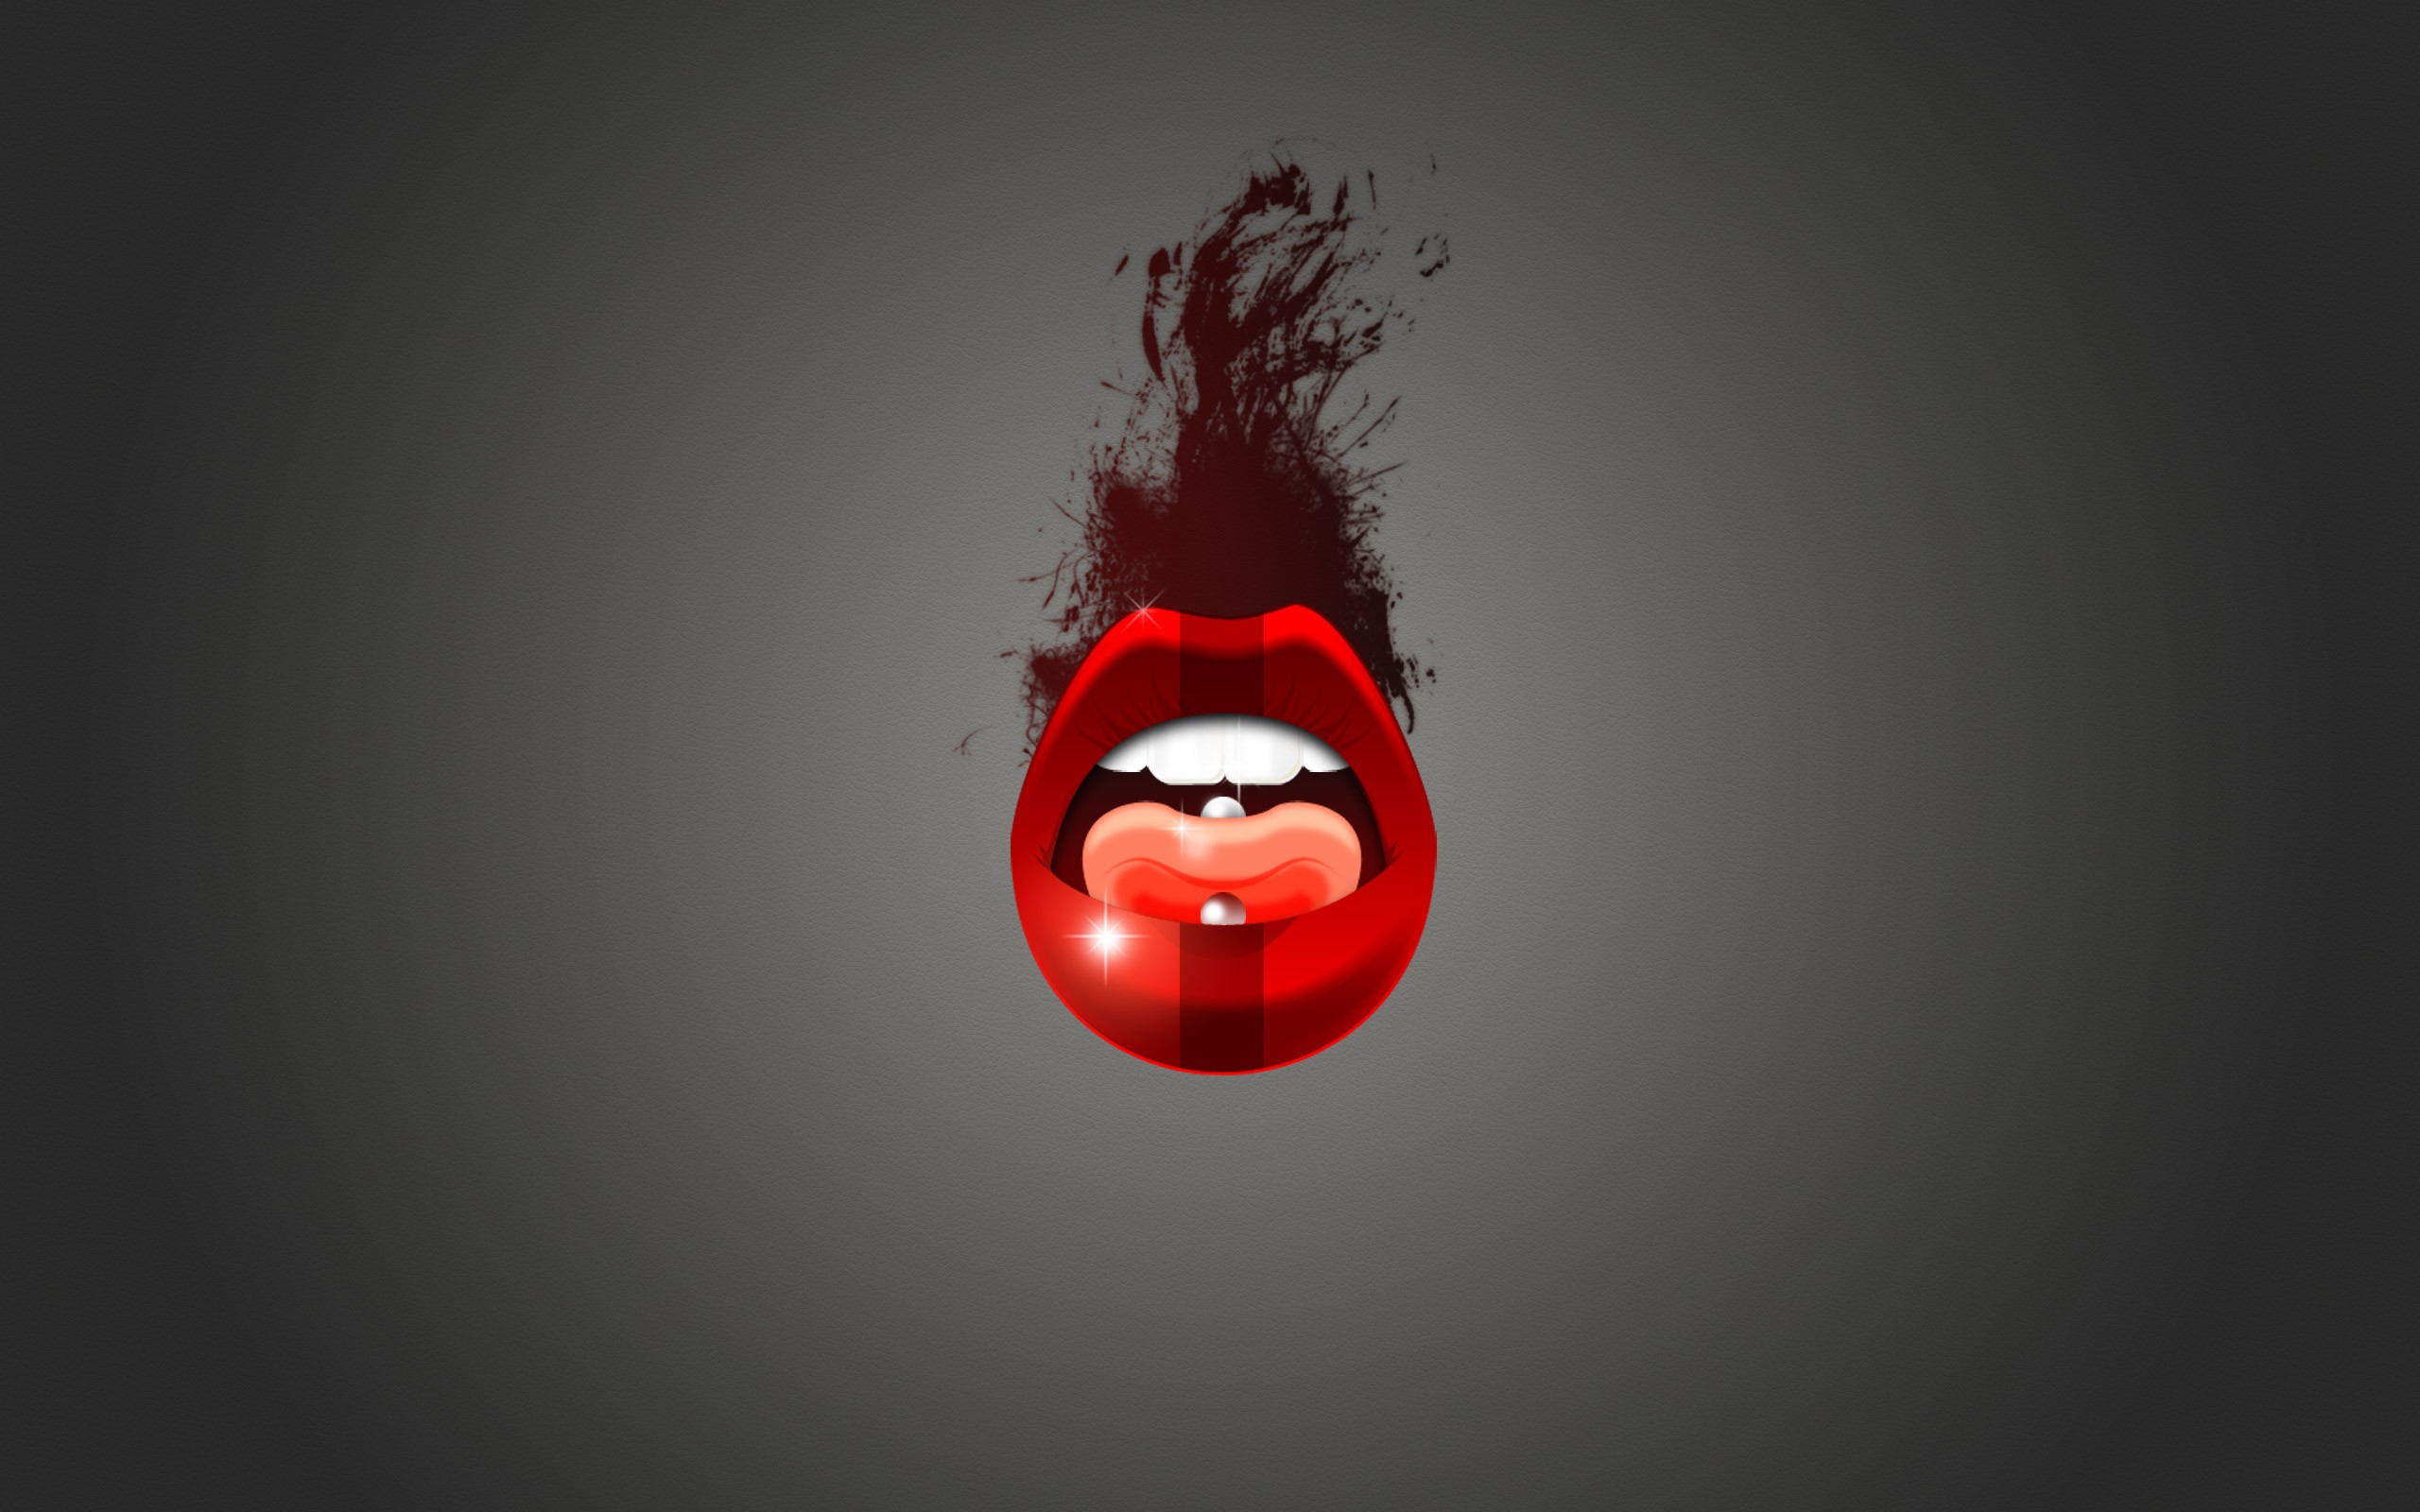 General 2560x1600 lips lipstick red tongues piercing gray background simple background digital art